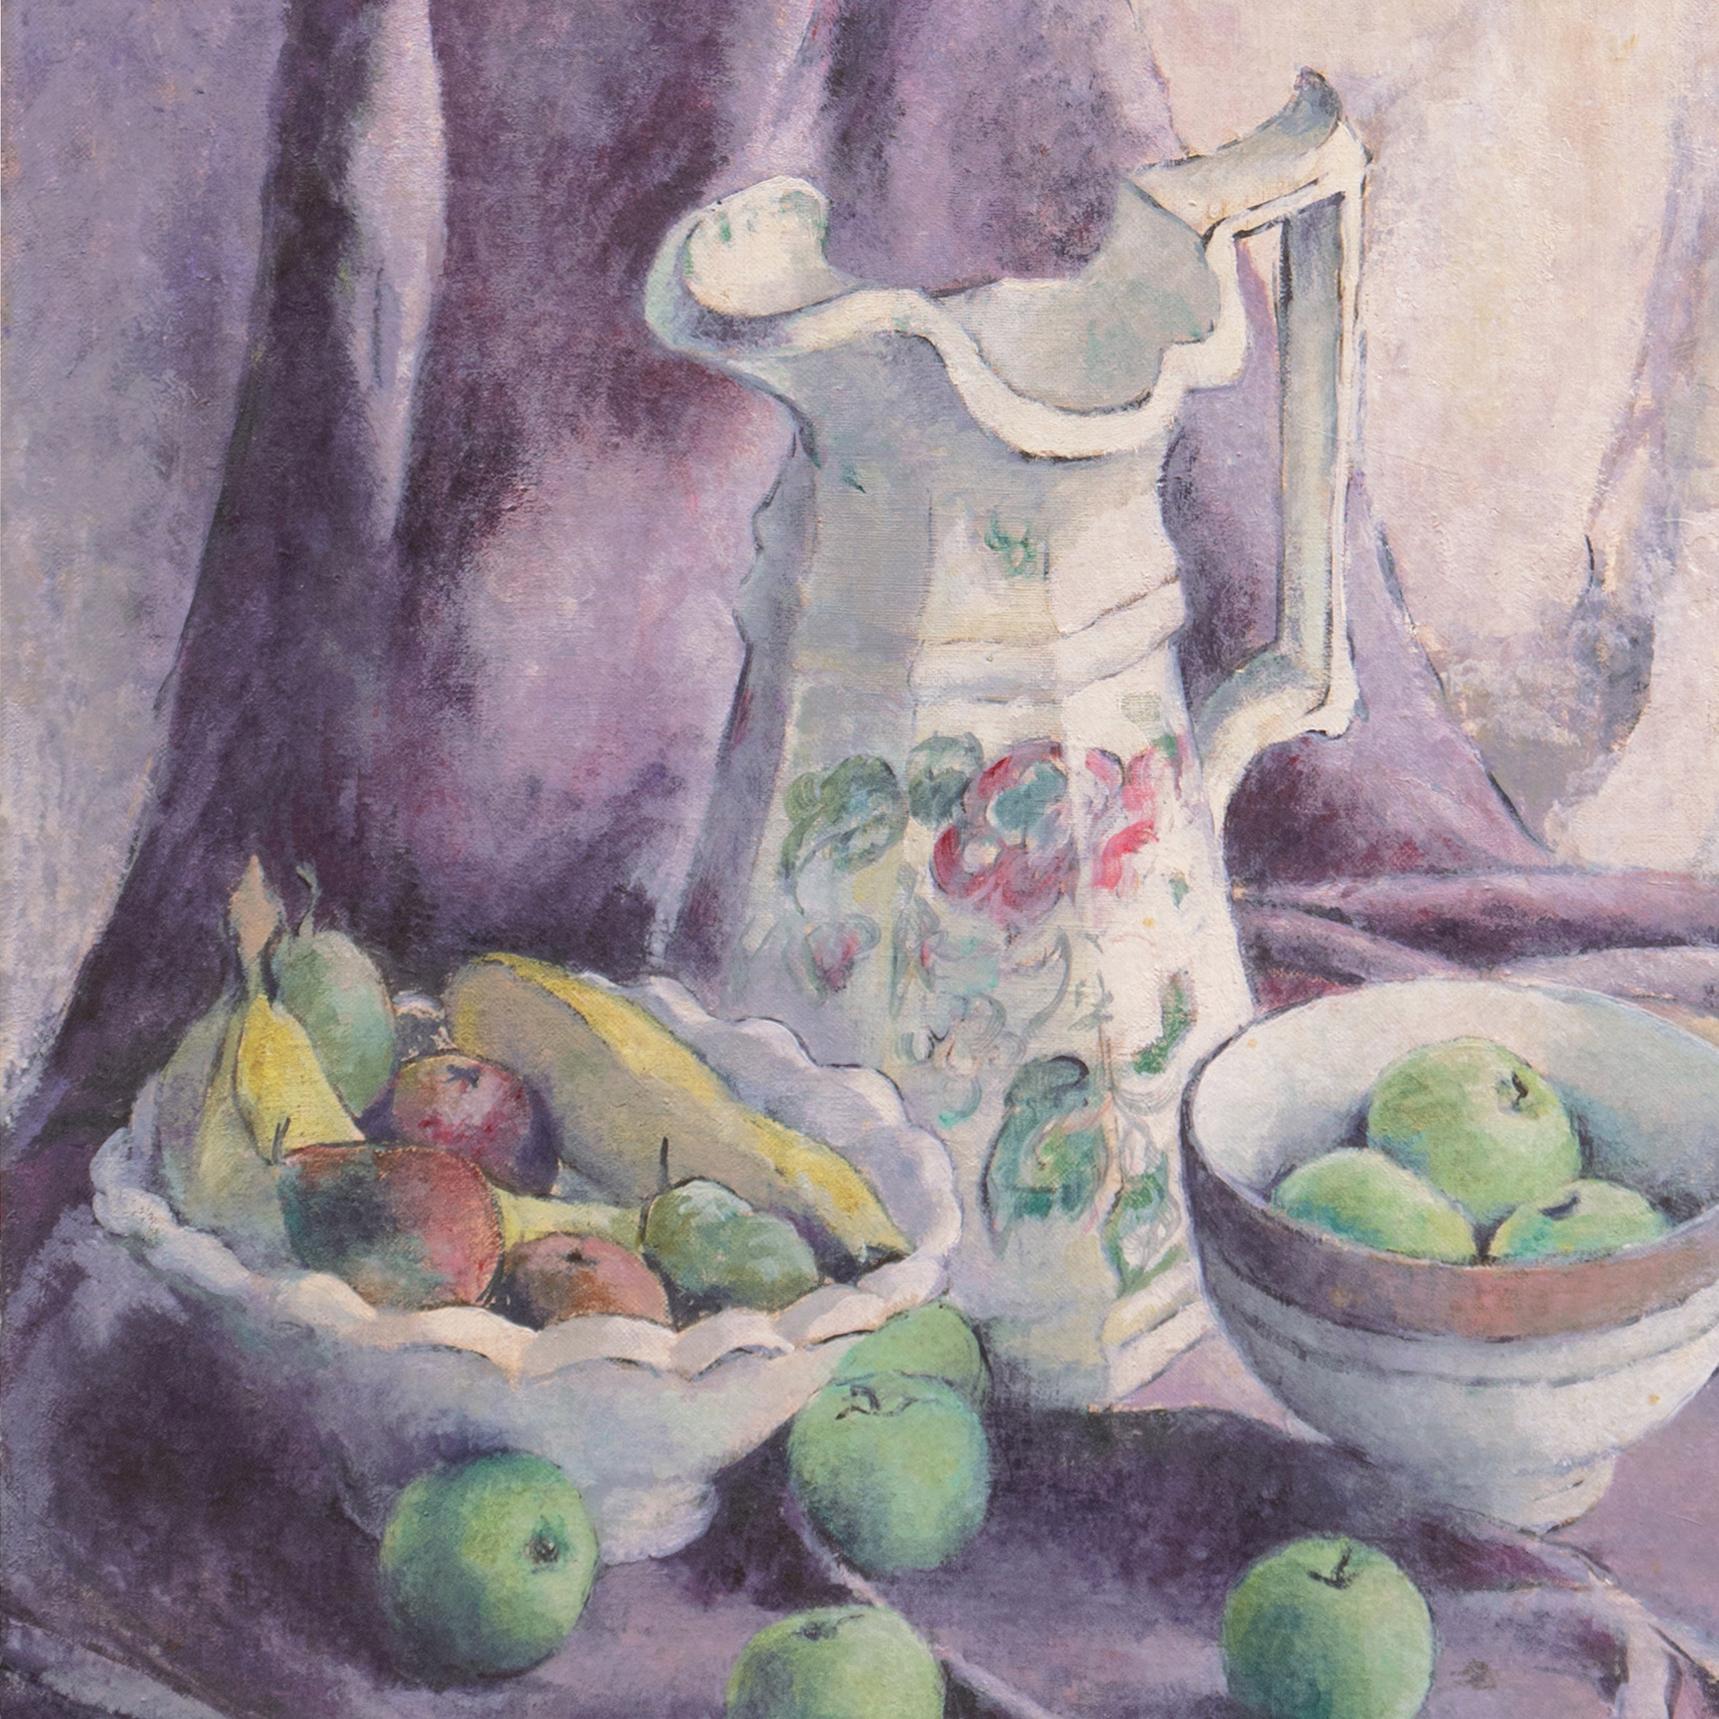 Signed lower right, 'Esther Lyne' (American, 20th century) and painted circa 1955.

A sensitively painted Post-Impressionist oil still-life showing a view of a hand-painted creamware jug with two bowls of fruit resting on a table draped with a lilac